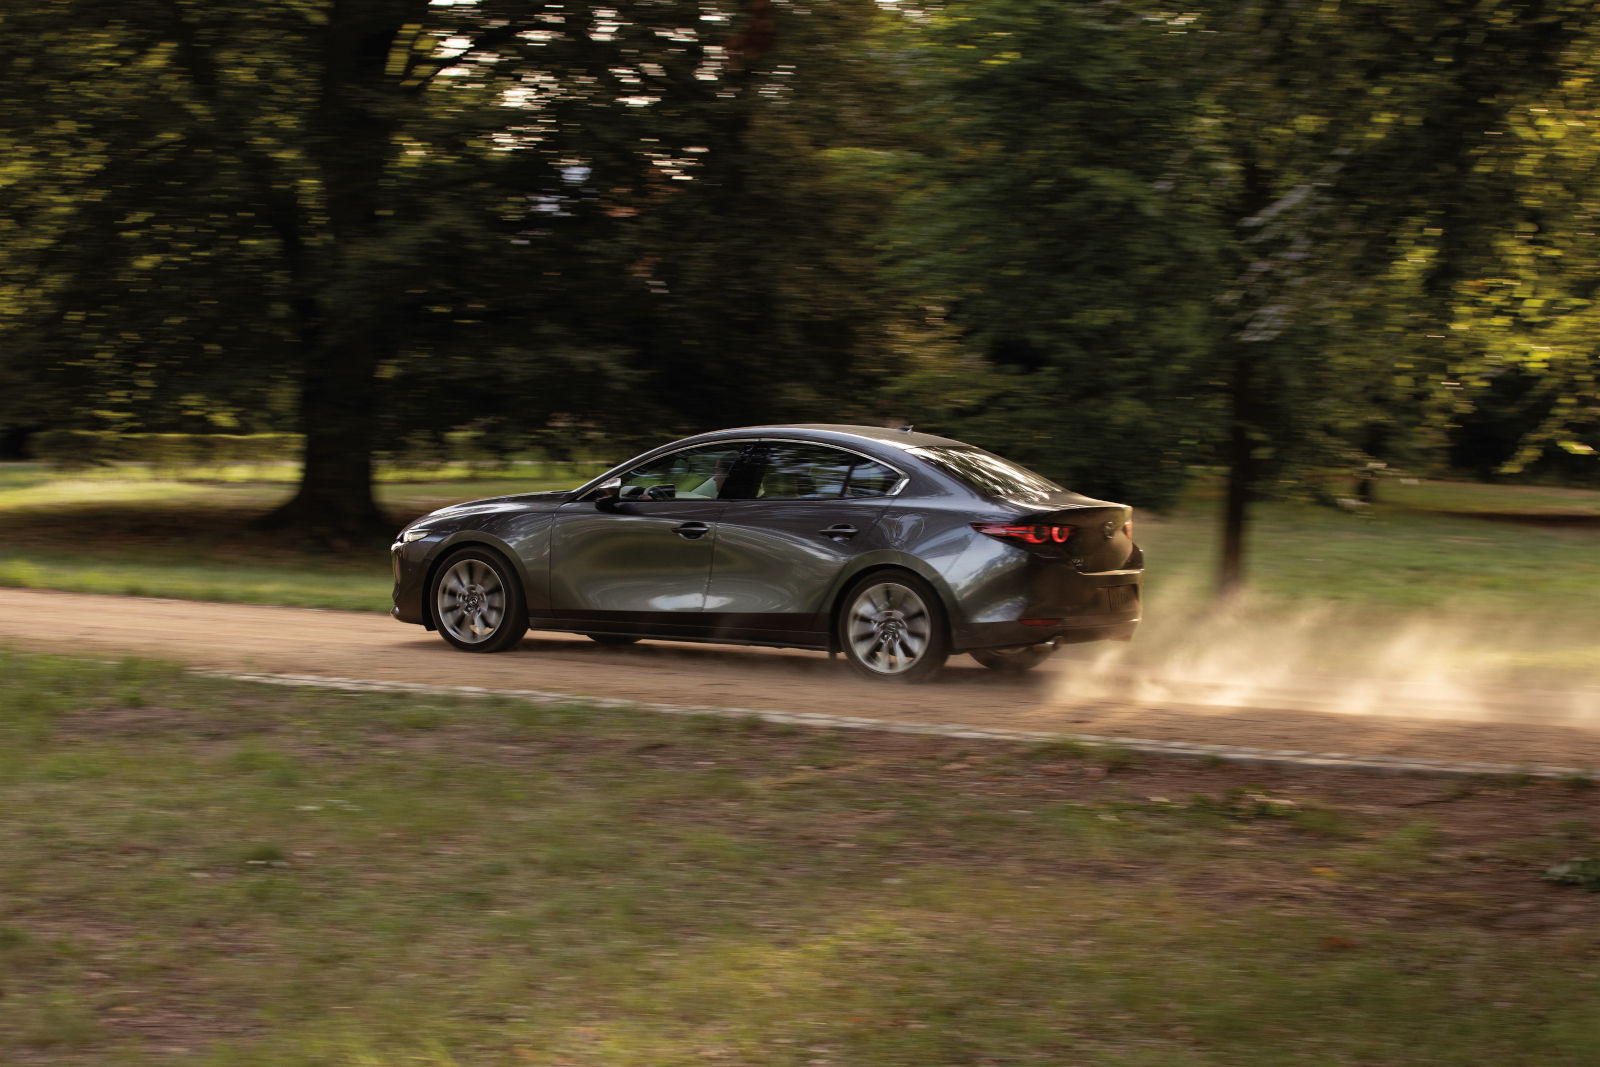 How Mazda's i-ACTIV AWD System Makes Winter Driving Easier